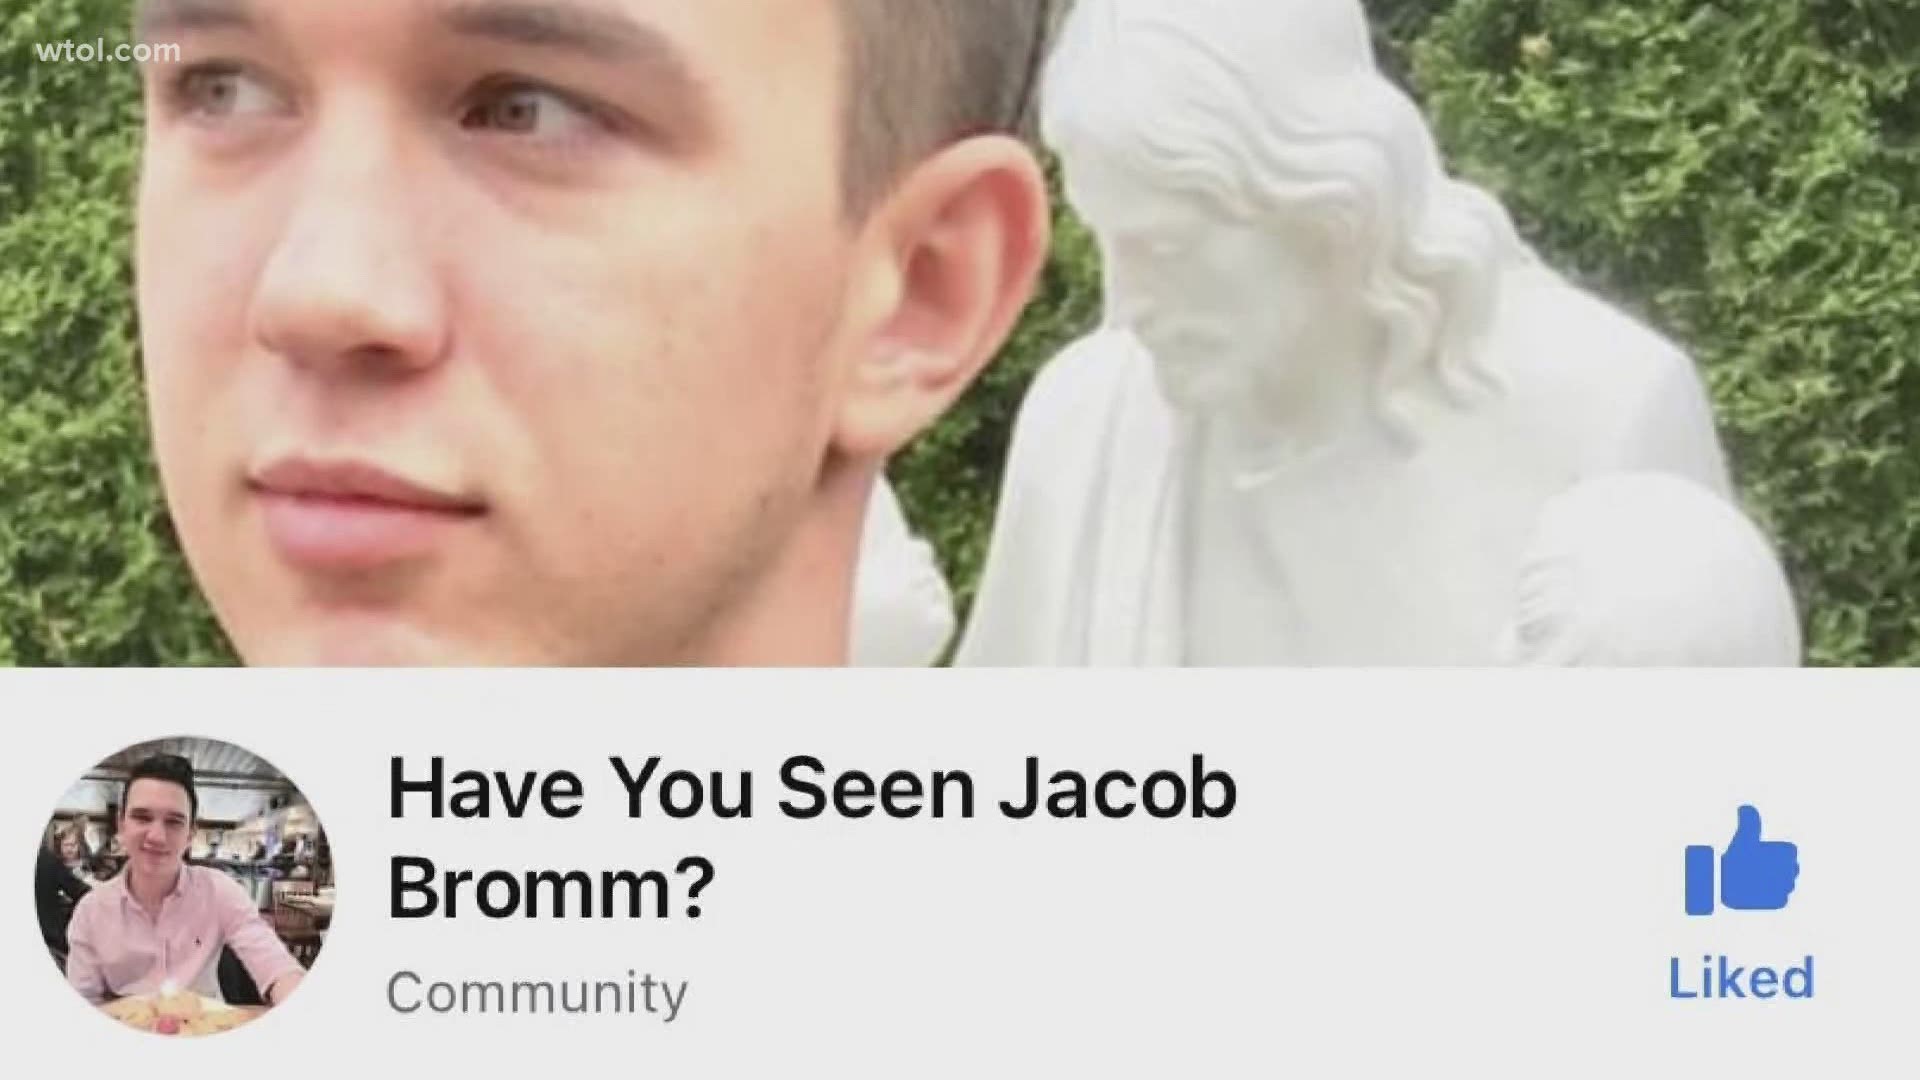 Jacob Bromm went off the grid in 2018 after starting his college career at Bowling Green. He filed a report saying he was OK and walked away from everything.